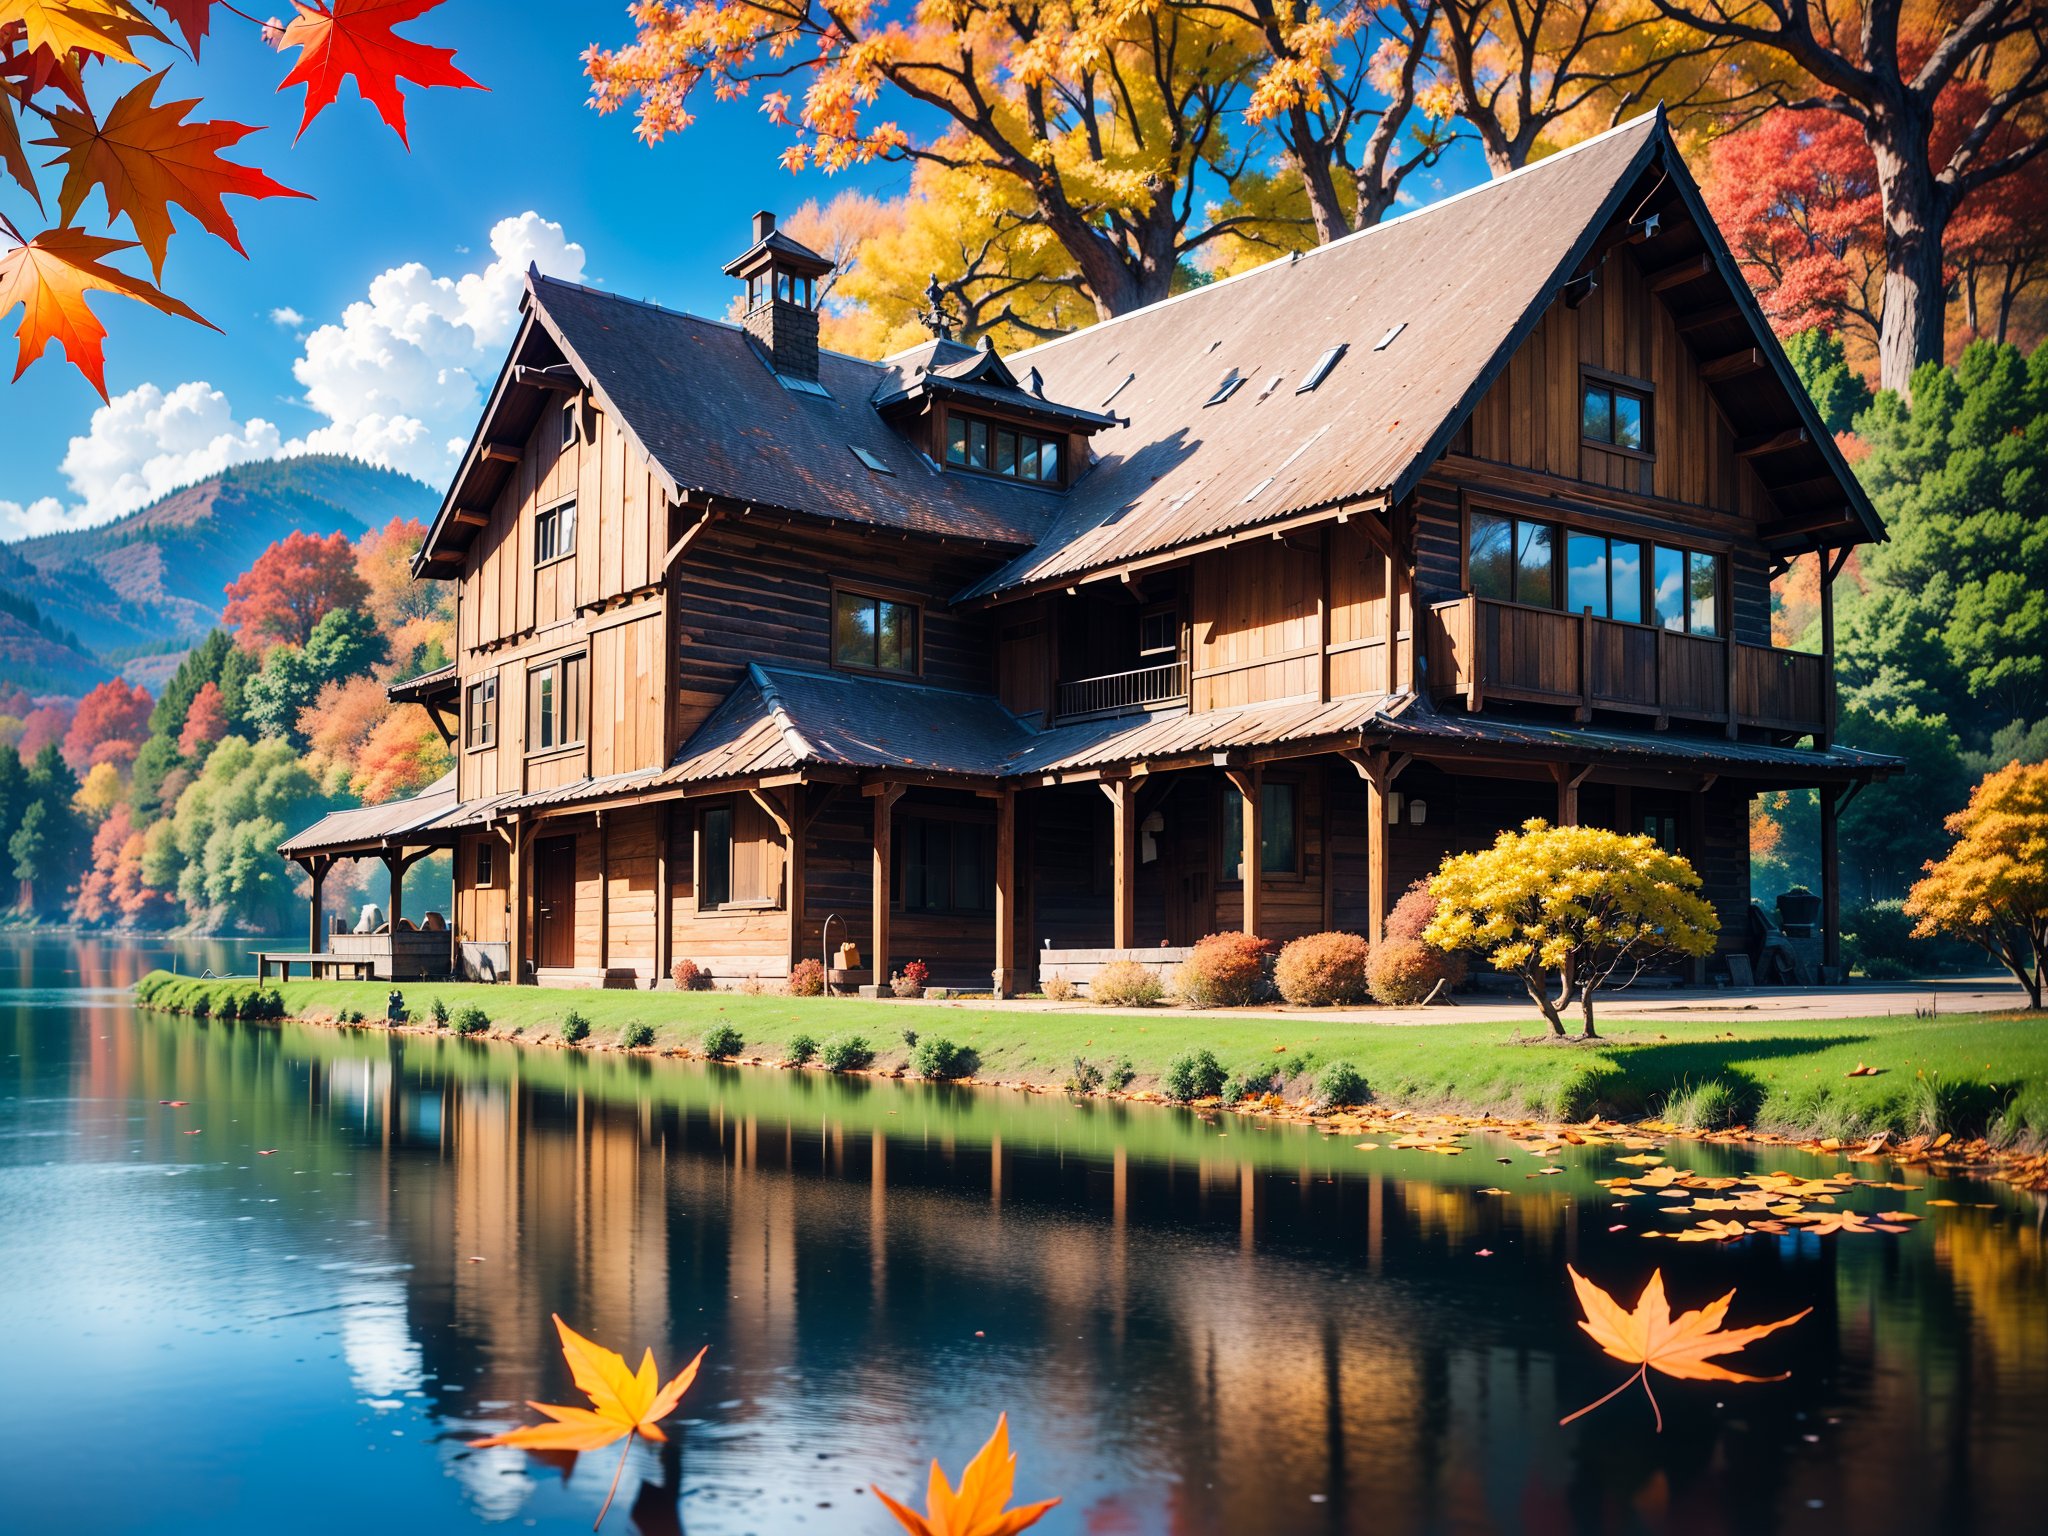 (masterpiece, legendary, highest_resolution), (hyper surrealism:1.4), enhanced_details, landscape_photography, (a stunning and vibrant RAW photograph of a big [wooden ? timber ? concerete] house during the autumn season with a beautiful lake in the foreground:1.5), (trees, fallen leaves, leaves falling, ground, grass, flower, sky, cloud, birds, sunlight, reflection, shadows, windy), intricate detail, (creative use of empty space:1.3),  (best quality, 64K, UHD, captivating, immersive, hyper_surrealism, no human, no character)